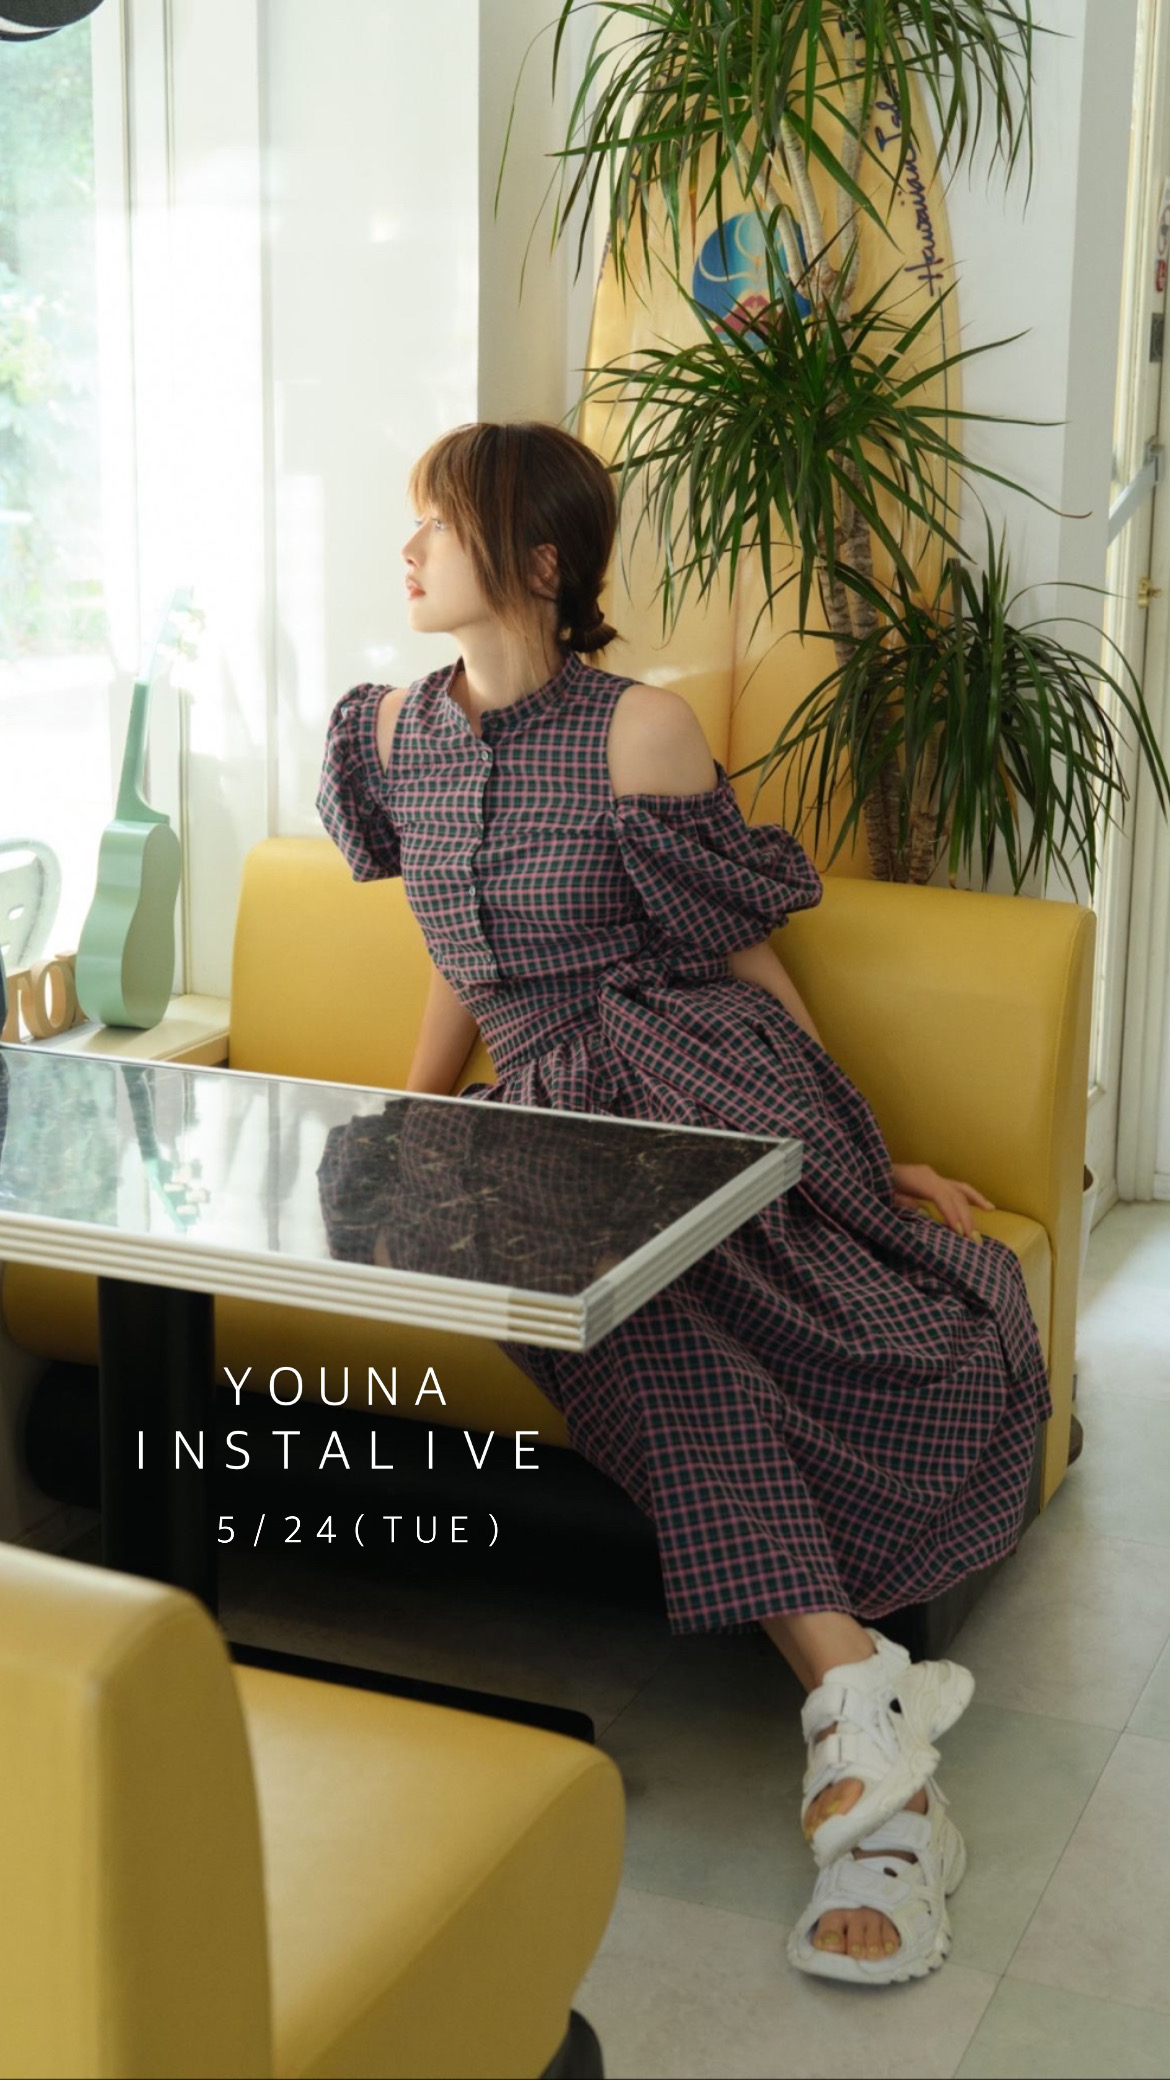 Archive.2022.5.24-youna